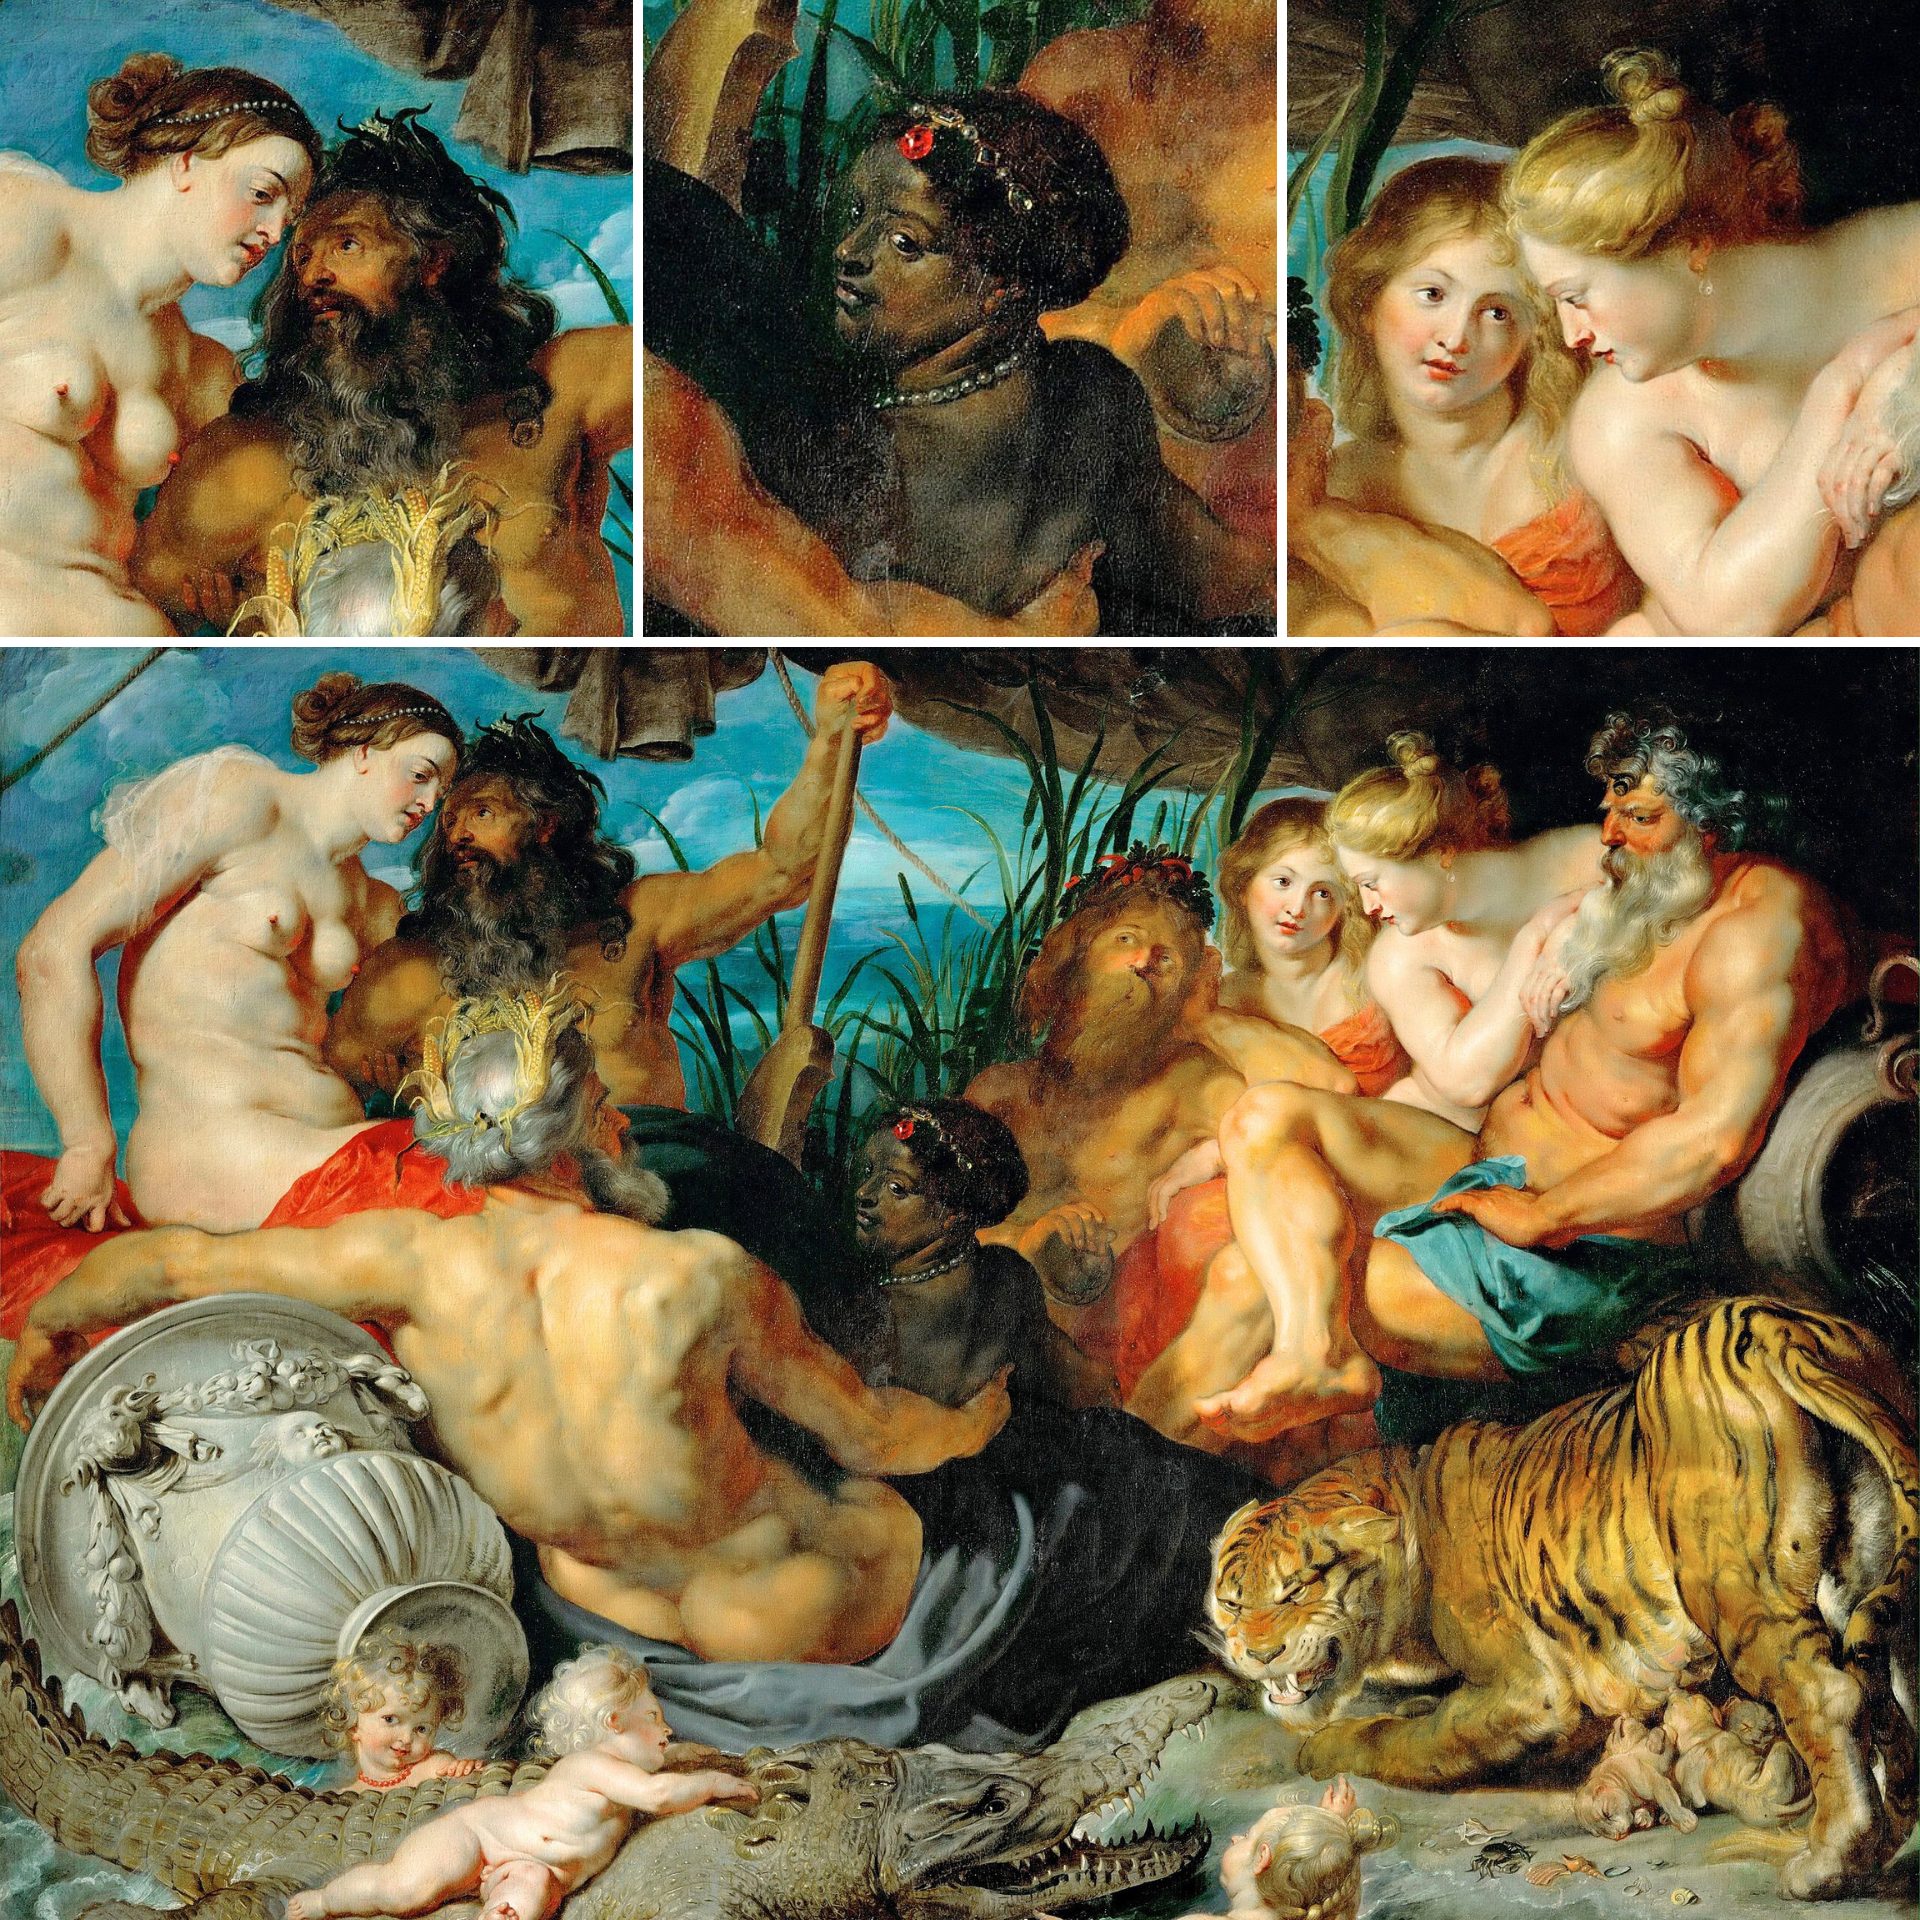 Peter Paul Rubens's painting, The Four Continents, artistically represents the continents of Europe, Asia, Africa, and America as alluring women, posing nude alongside male personifications of their prominent rivers including the Danube, Ganges, Nile, and Río de la Plata.